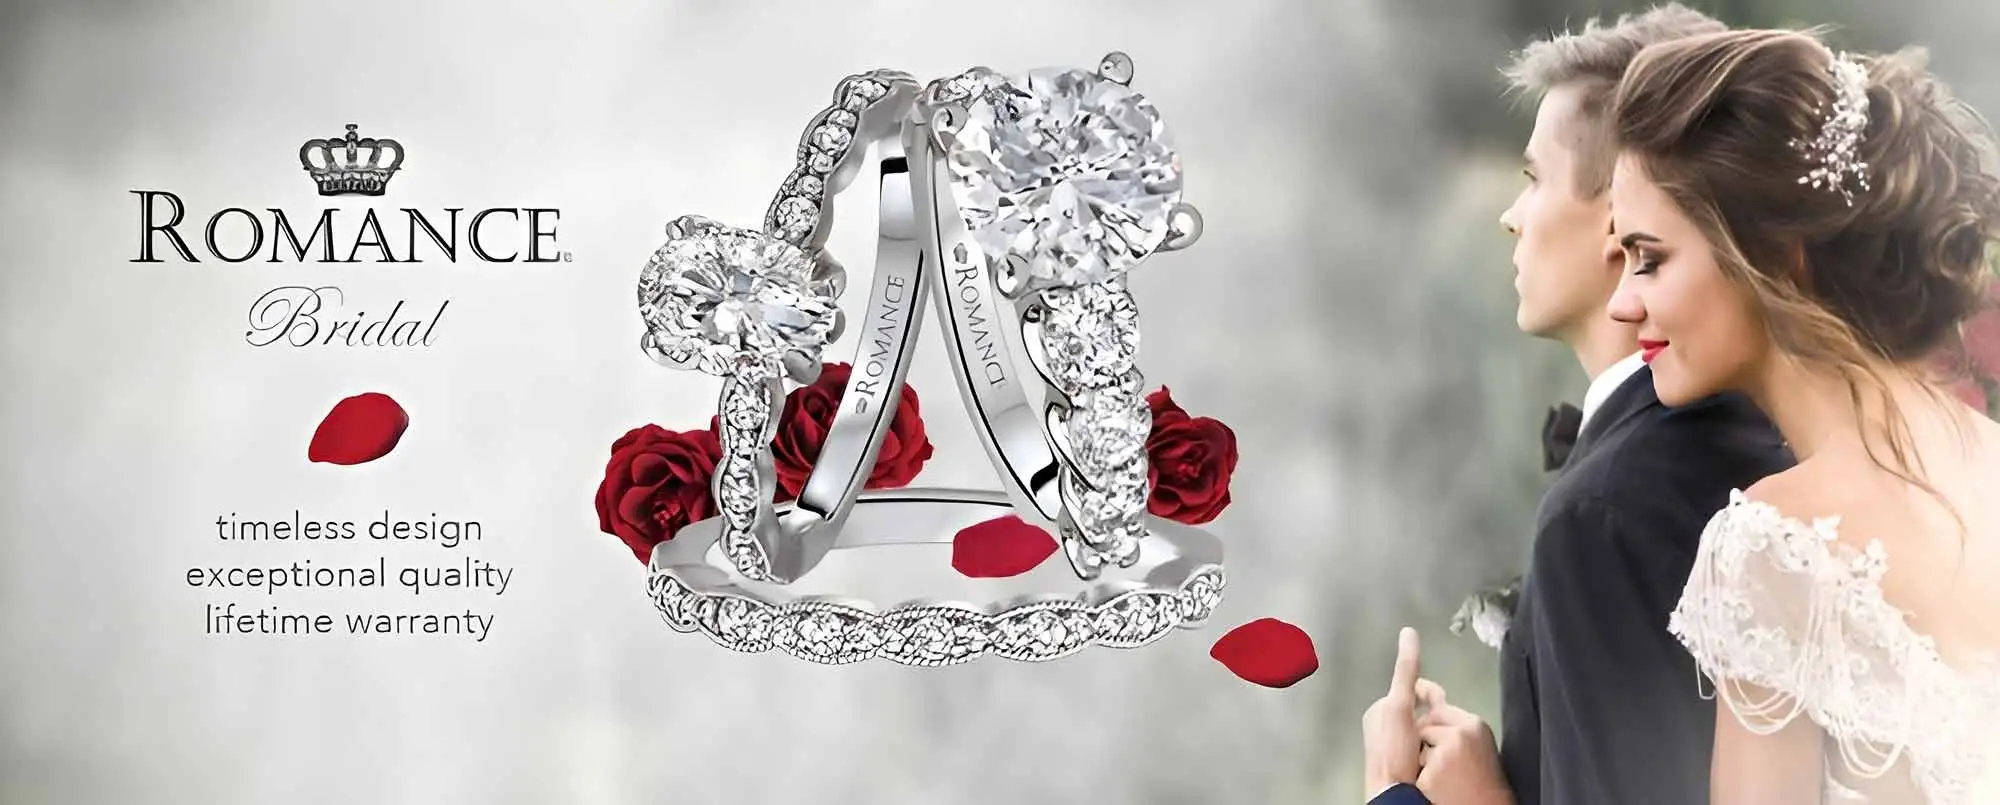 Romance bridal collection at Showcase Jewelers